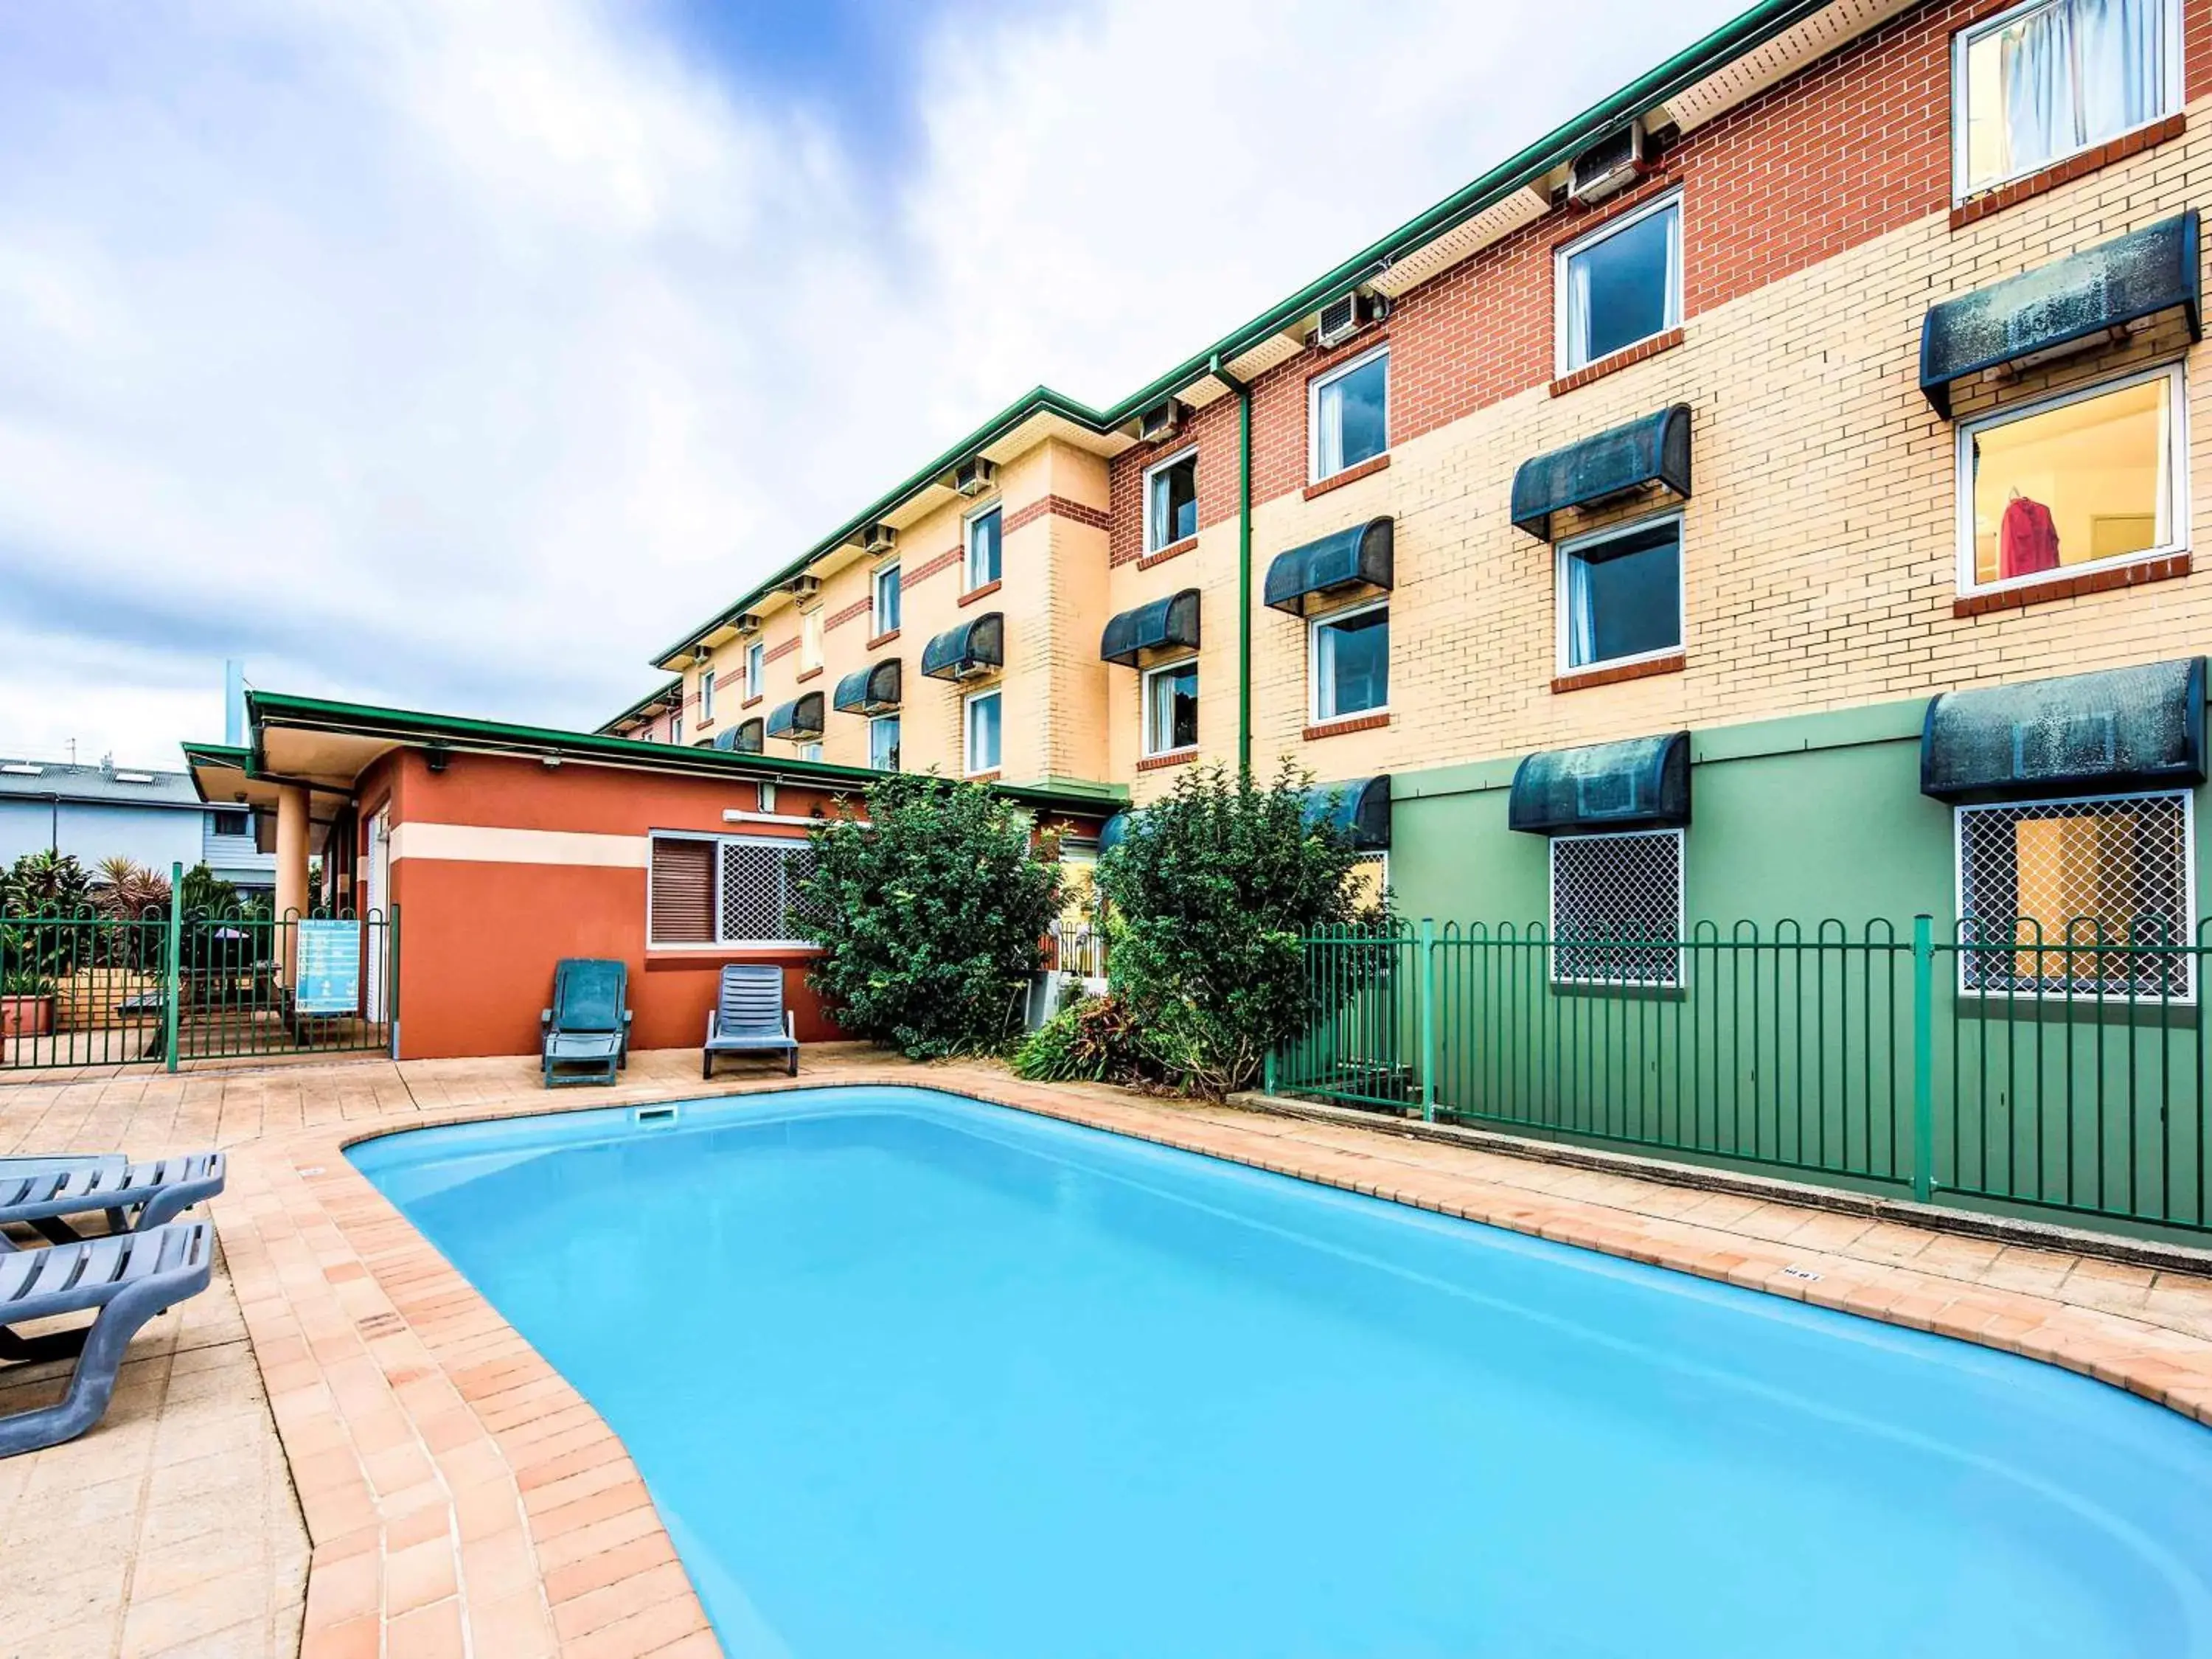 Other, Property Building in ibis Budget Coffs Harbour